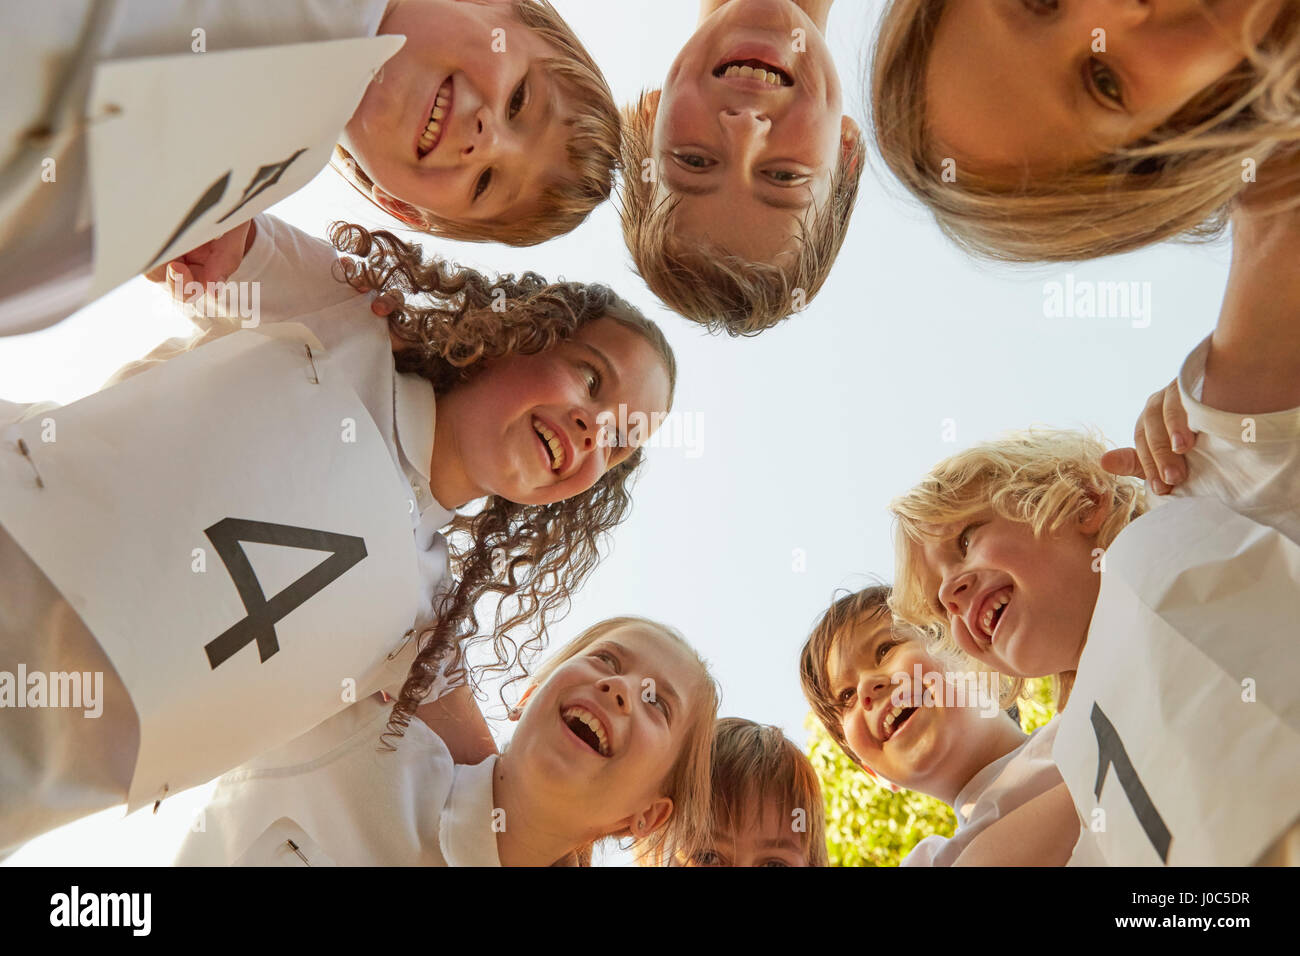 Low angle view of boy and girl sport team huddled in circle Stock Photo